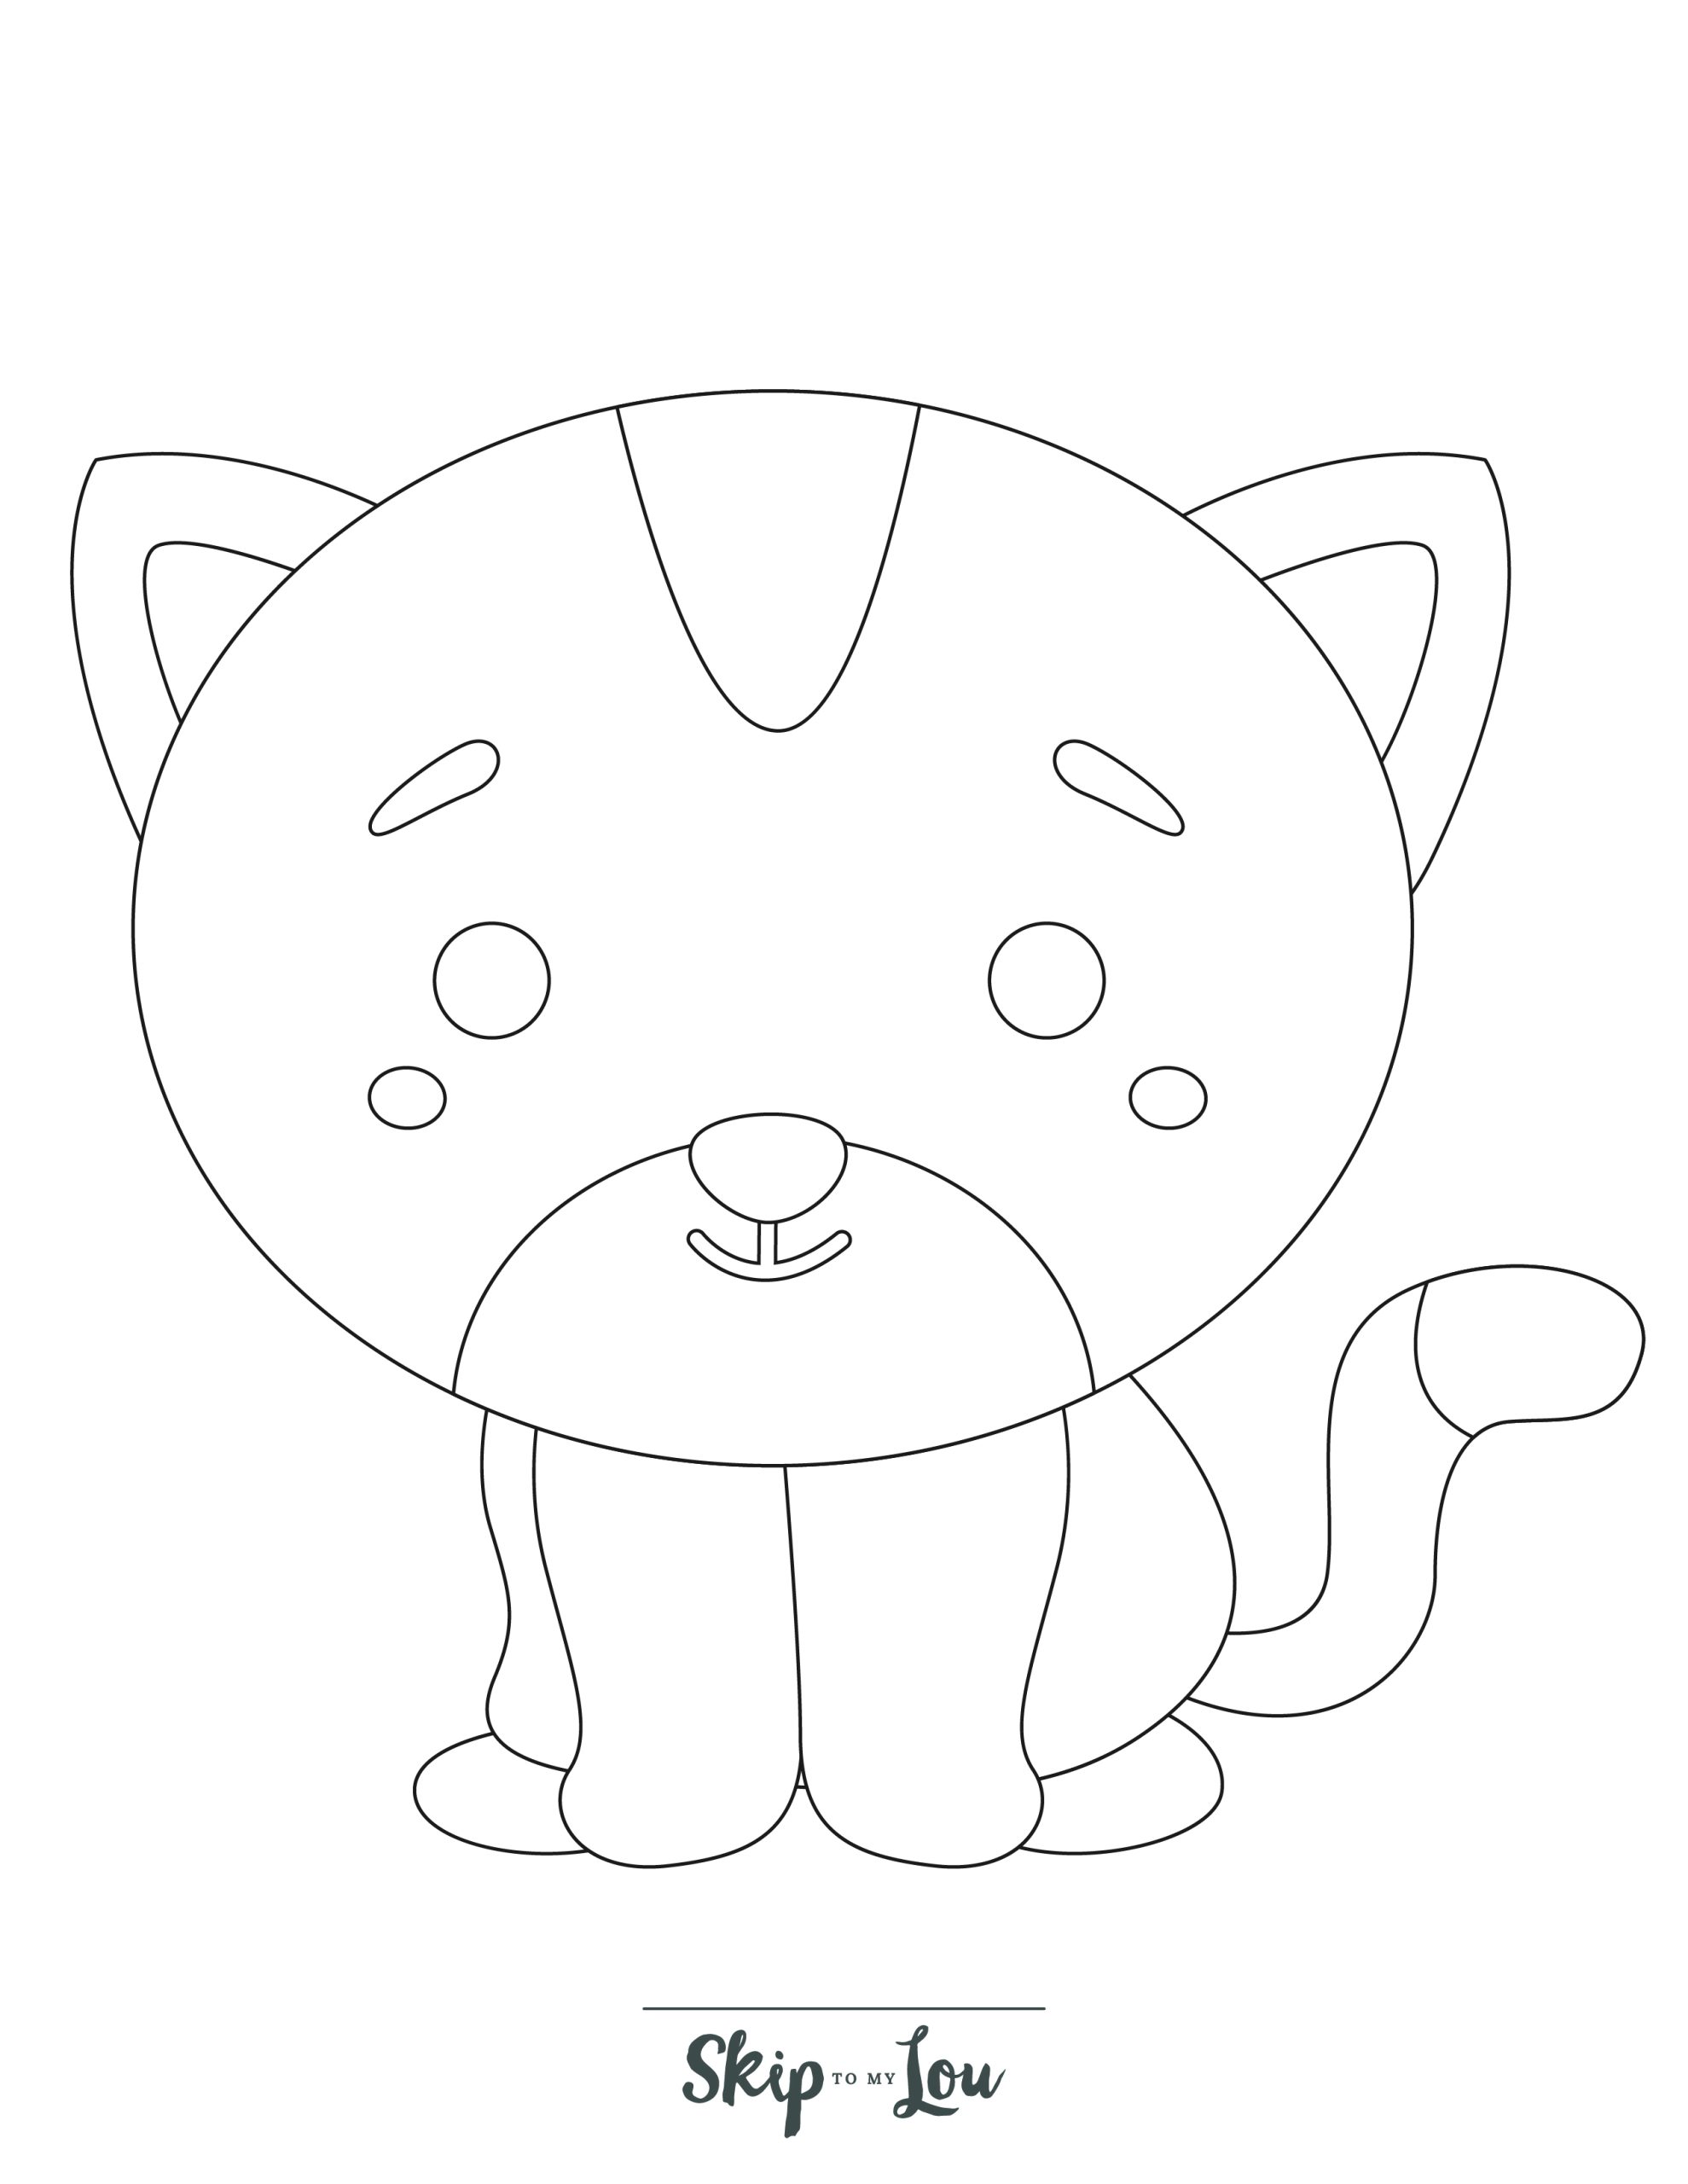 Preschool Coloring Page 3 - Simple line drawing of a cat 